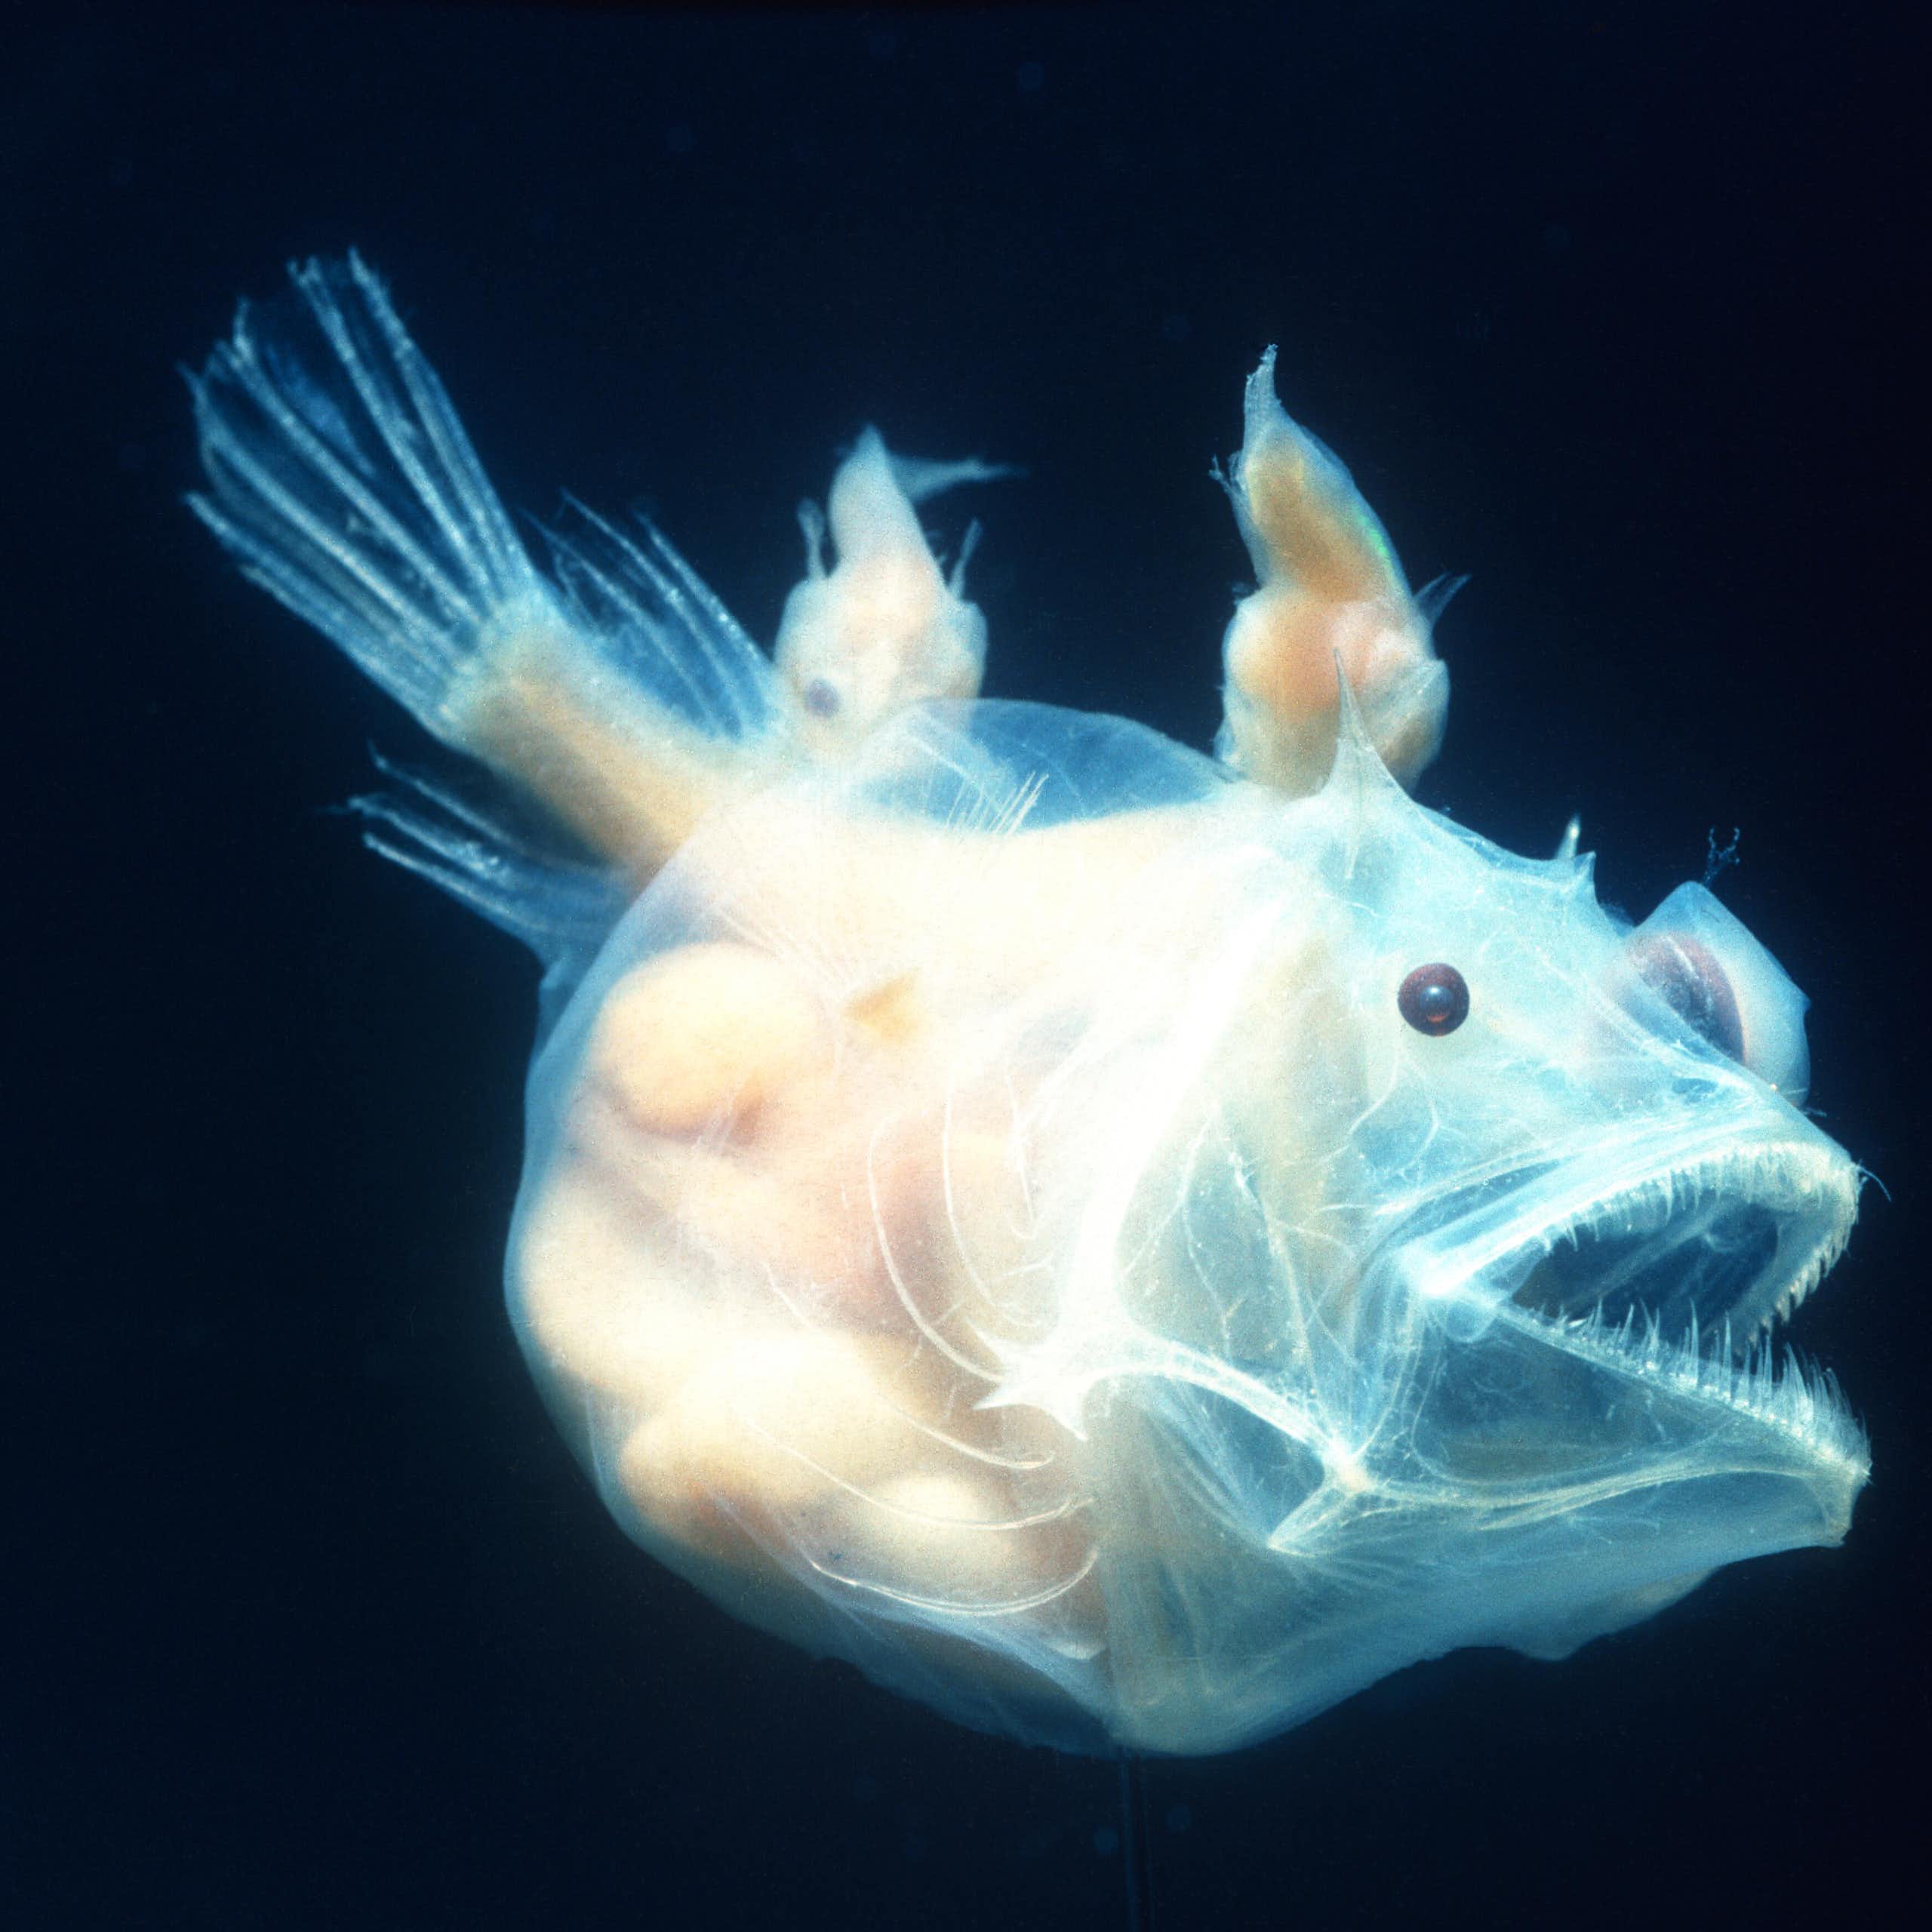 Huge female anglerfish with two small males fused to her